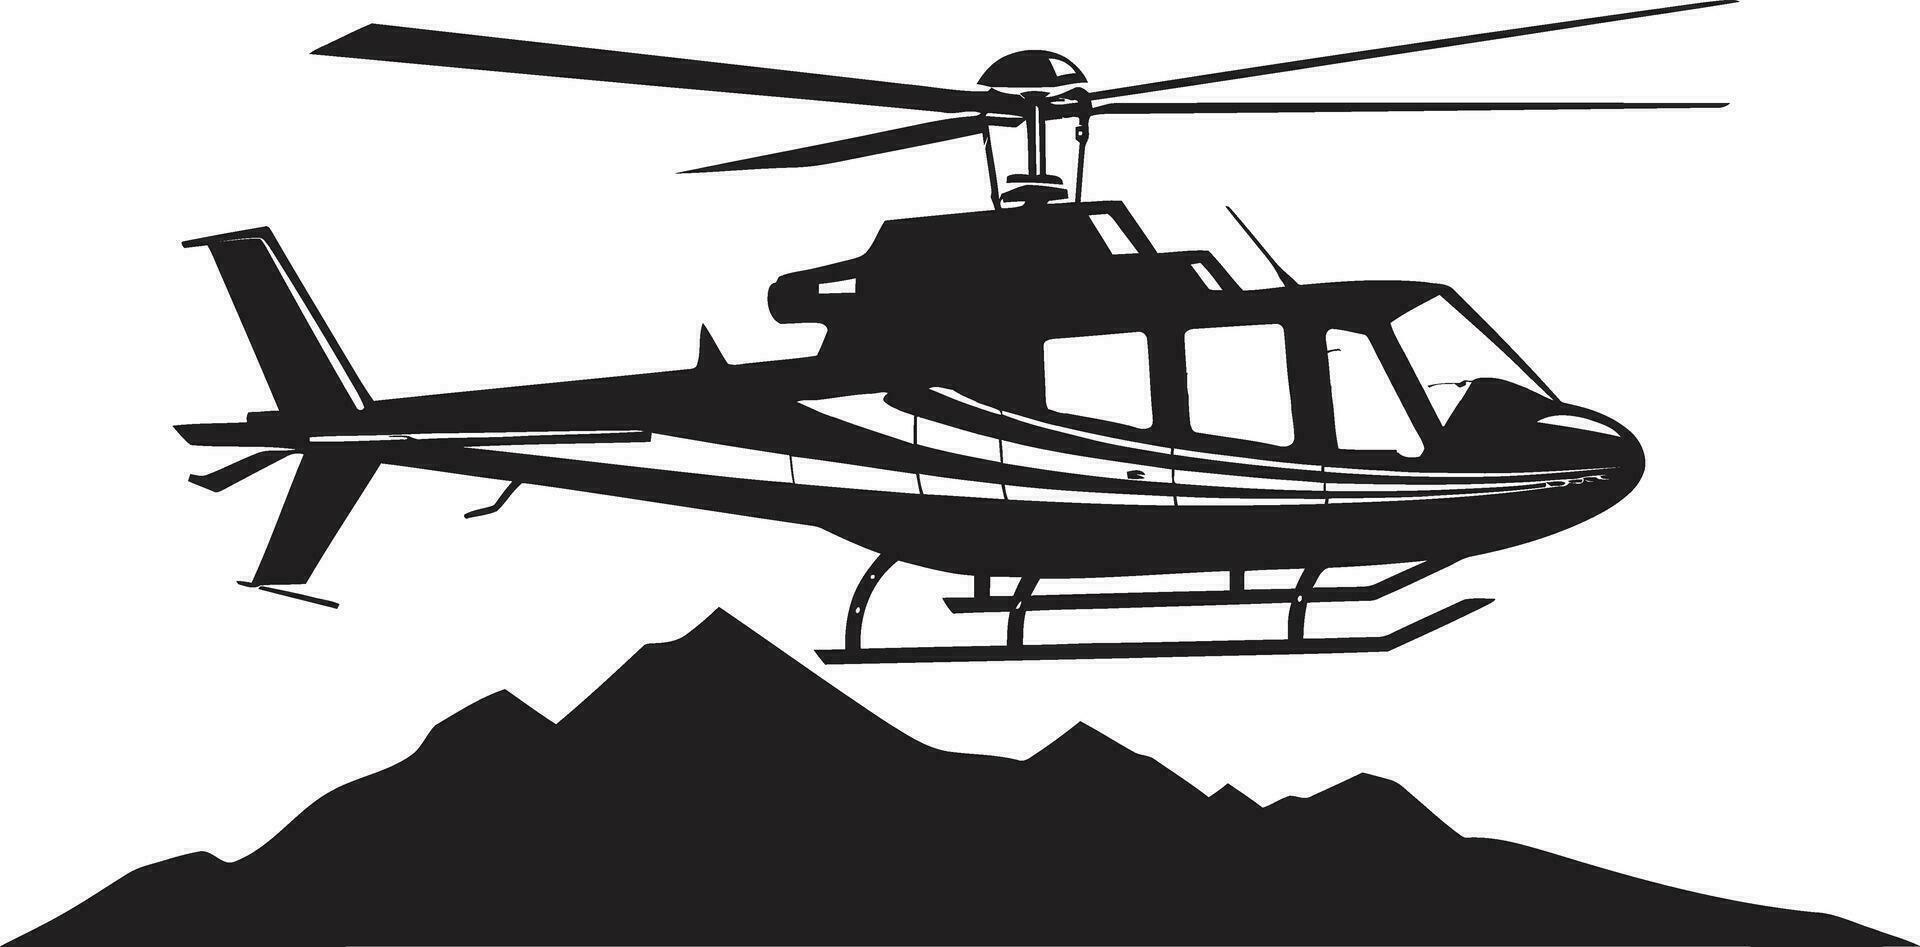 Chopper Charisma Helicopter Vector Showcase Helicopter Vector Artistry Unveiled